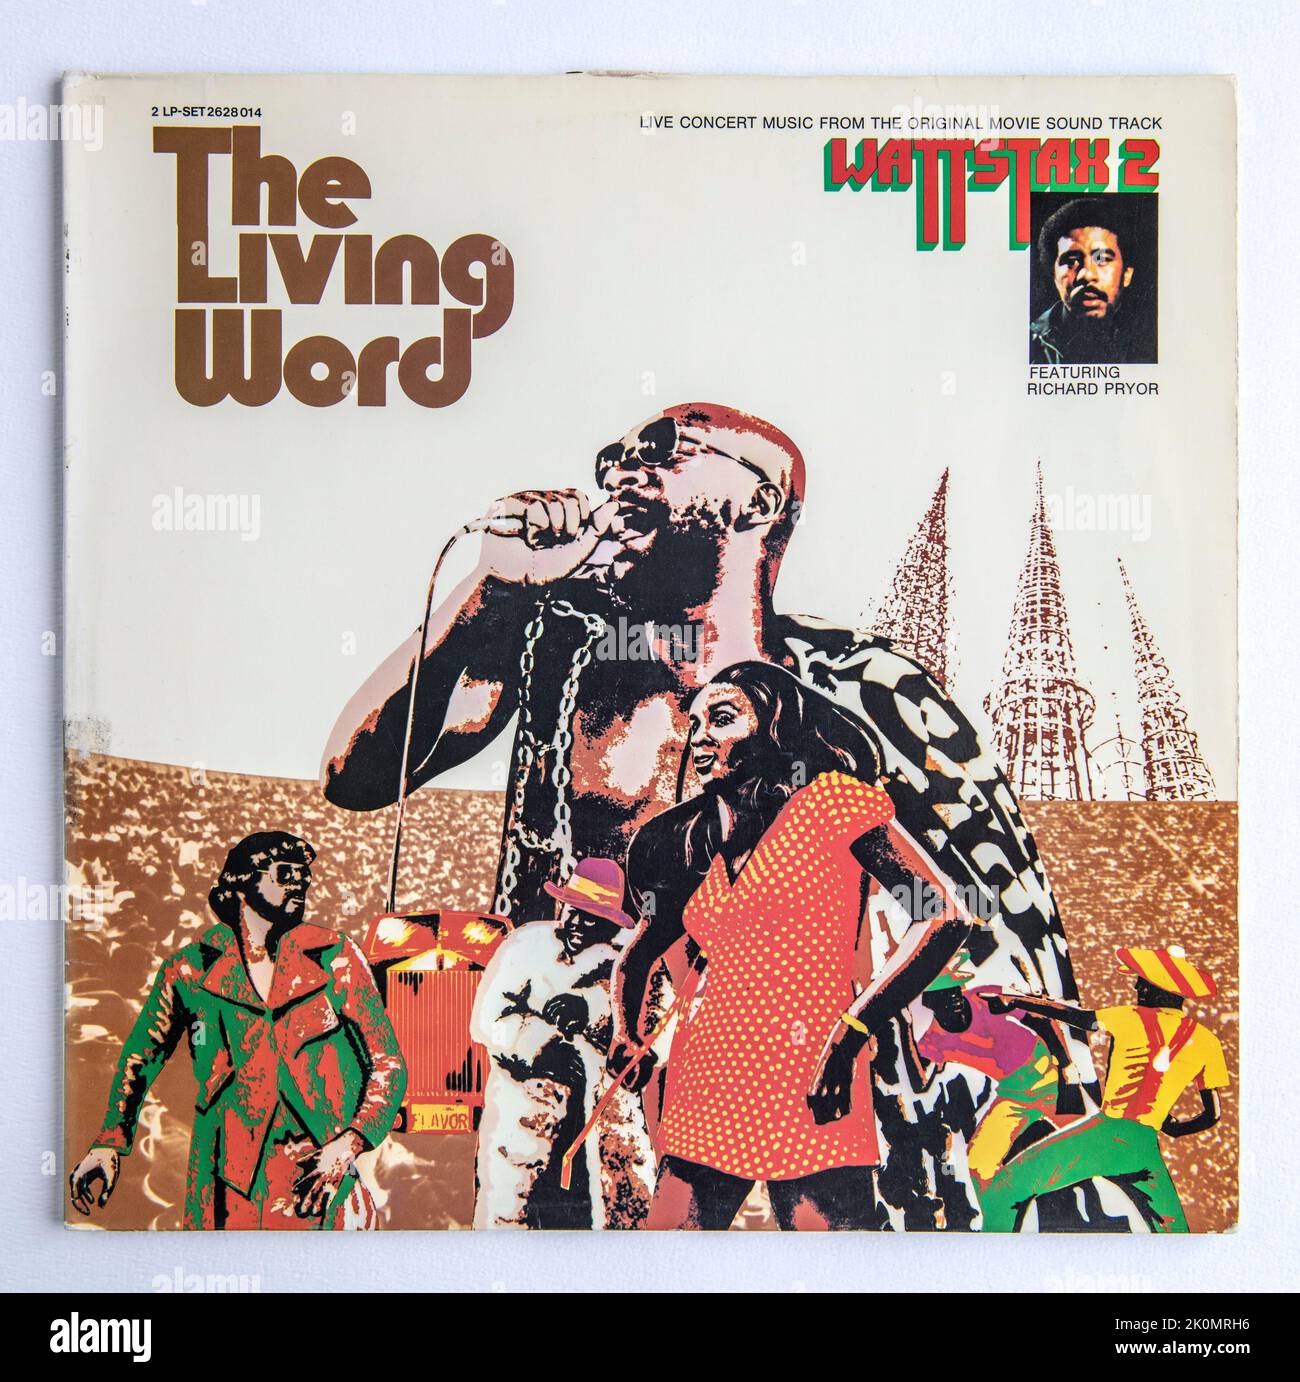 LP cover of The Living Word Wattstax 2, featuring music recorded live at a concert held in 1972. The album was released in 1973. Stock Photo